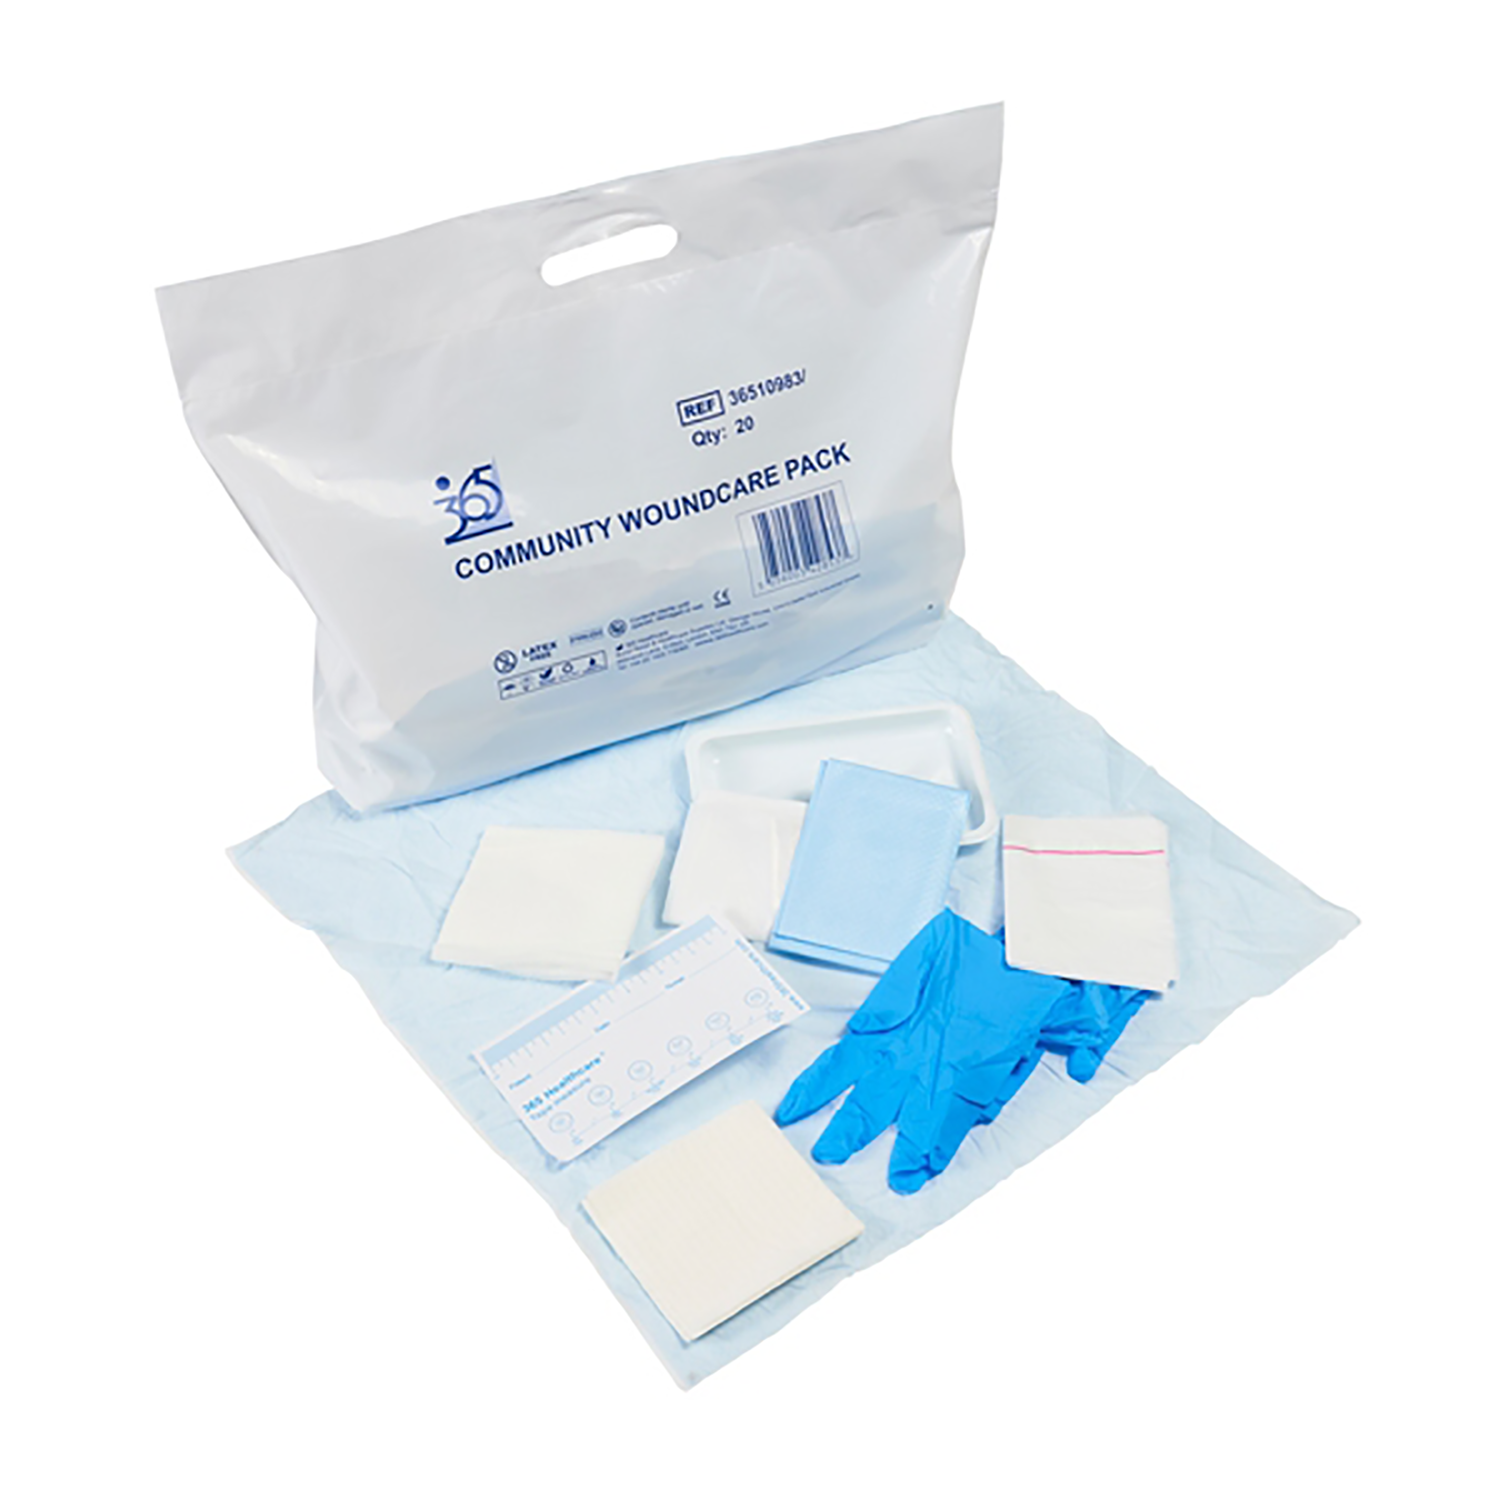 Community Wound Care Pack with Large Gloves